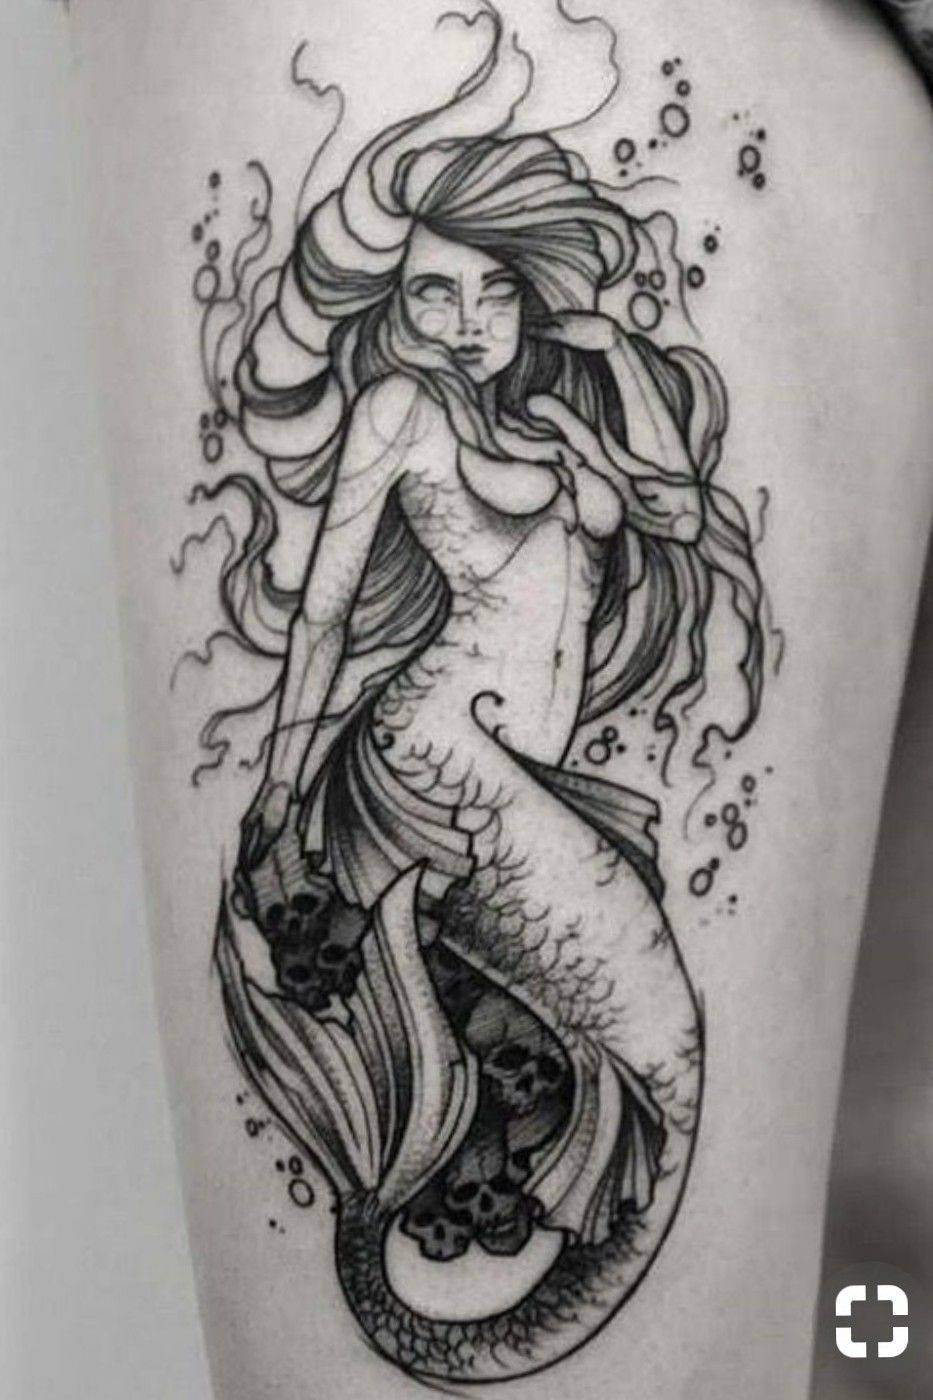 Watercolor mermaid tattoo on the thigh.